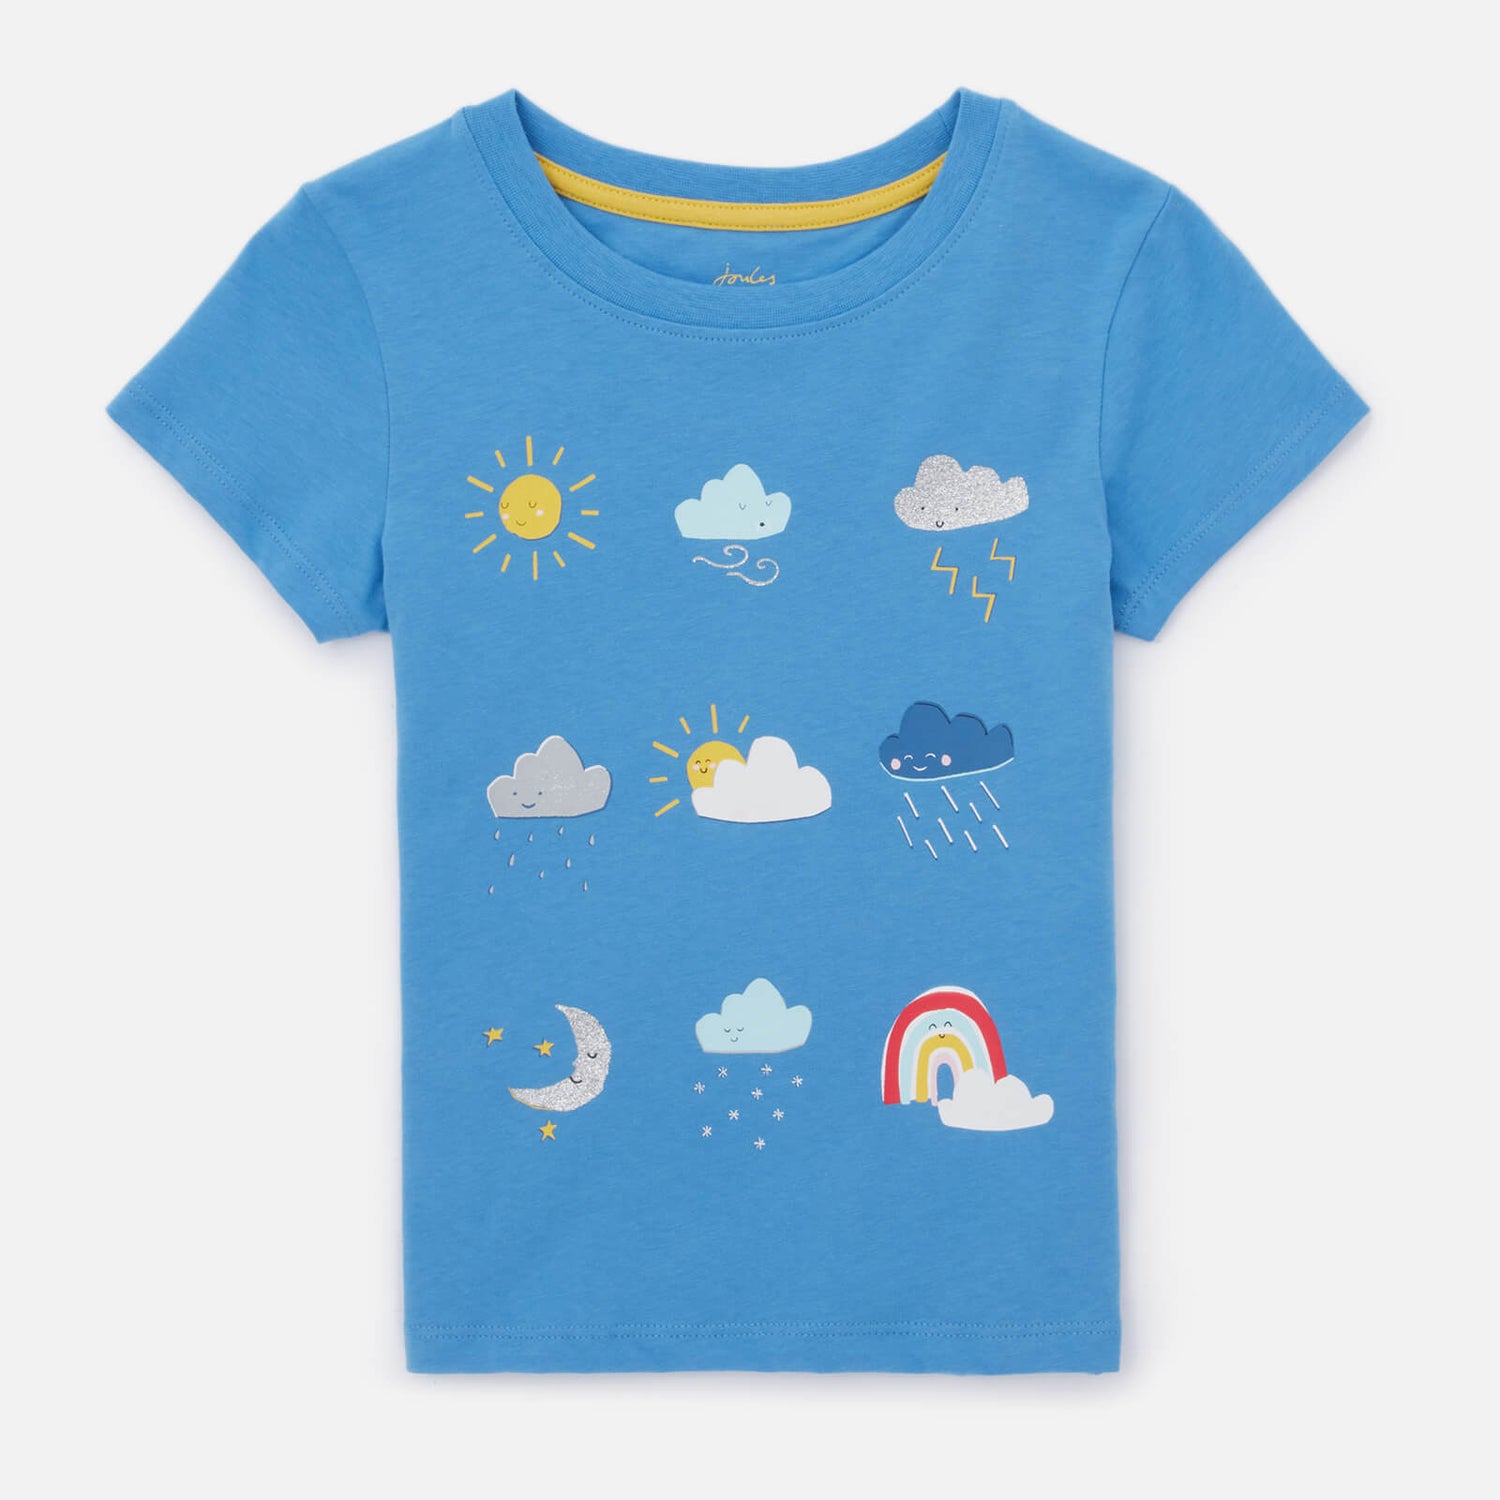 Joules Kids' Short Sleeve Artwork T-Shirt - Blue Weather Icons